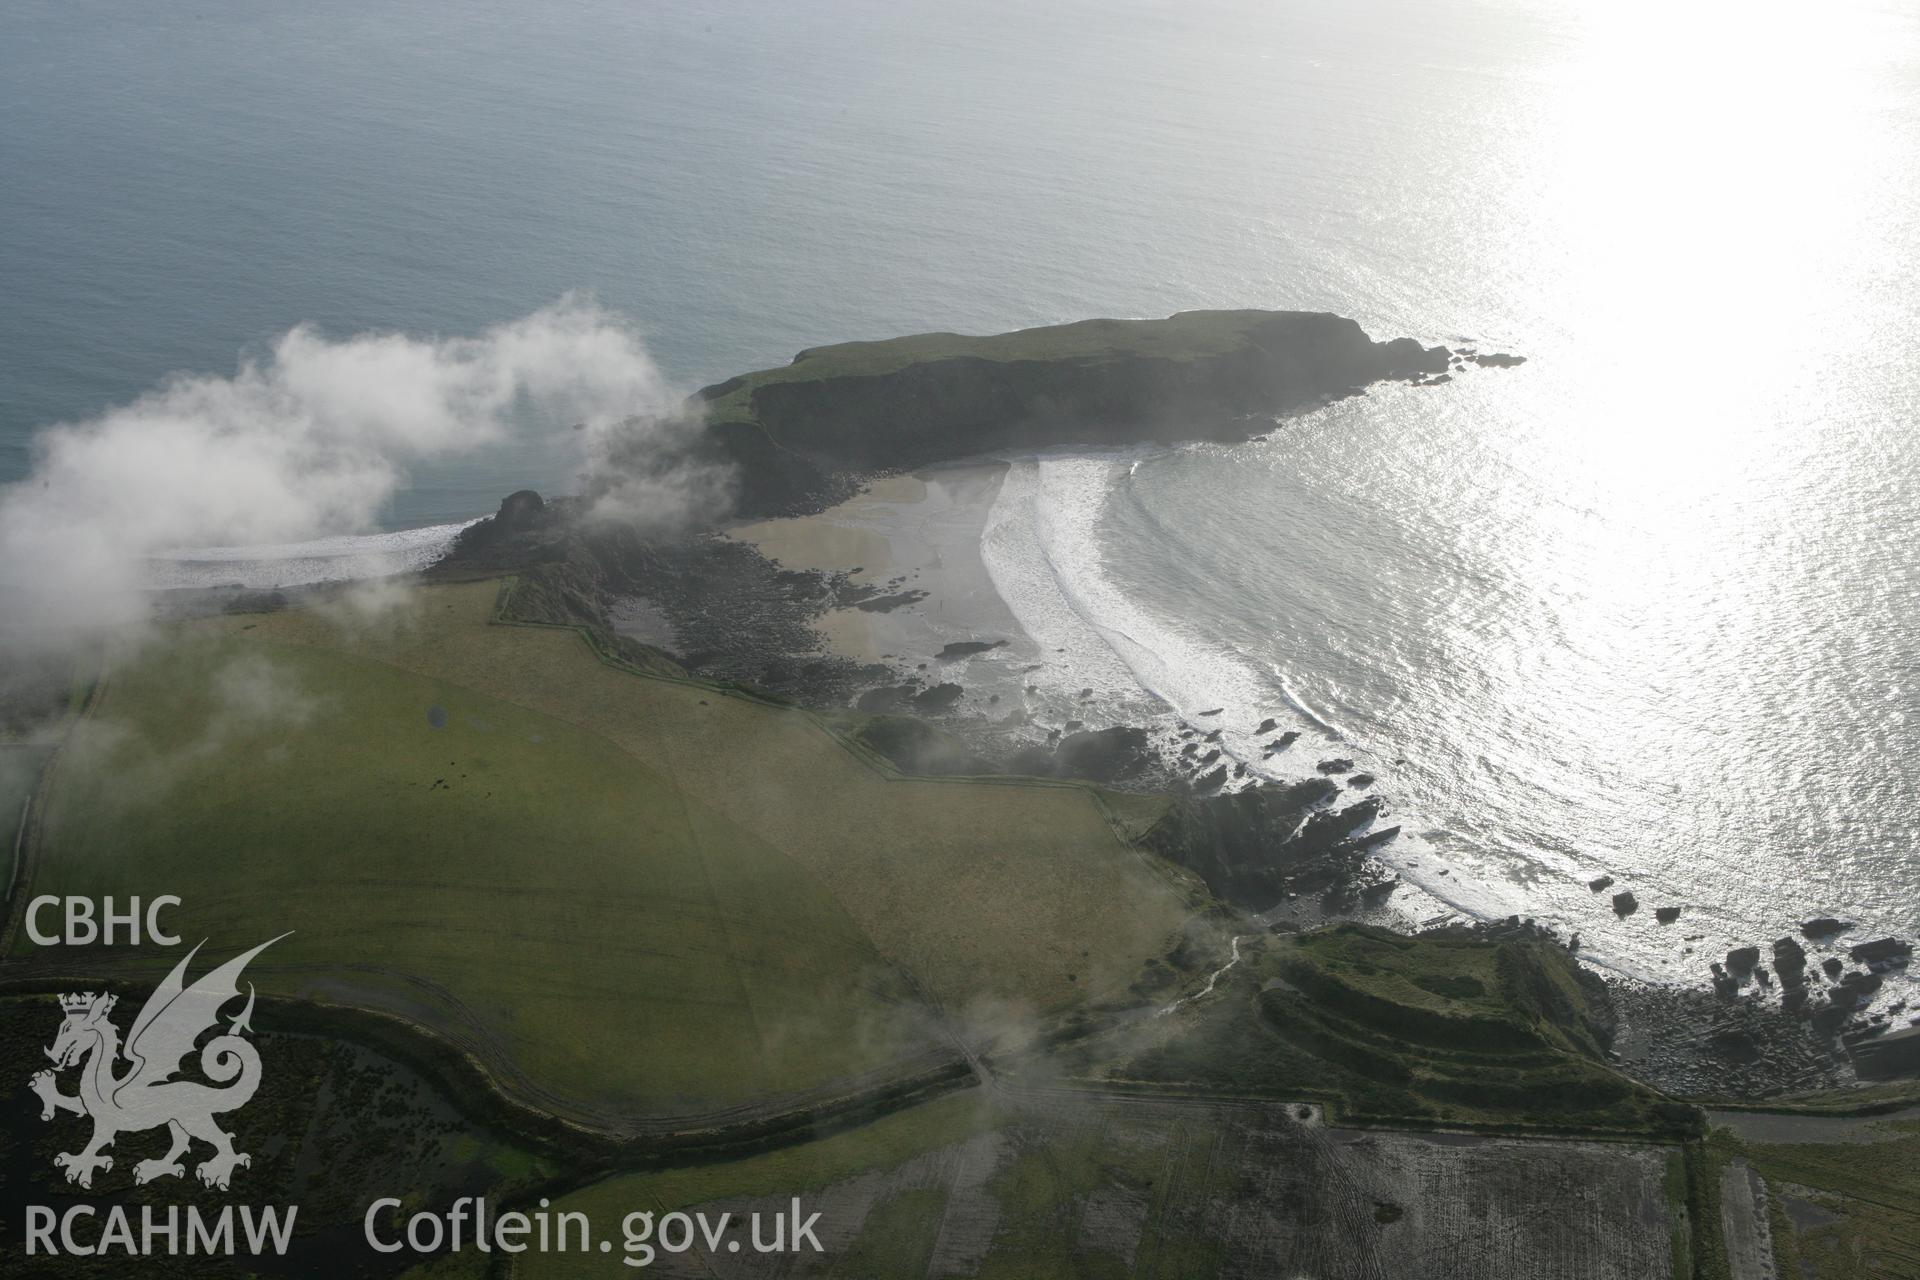 RCAHMW colour oblique aerial photograph of Gateholm Island. Taken on 28 January 2009 by Toby Driver